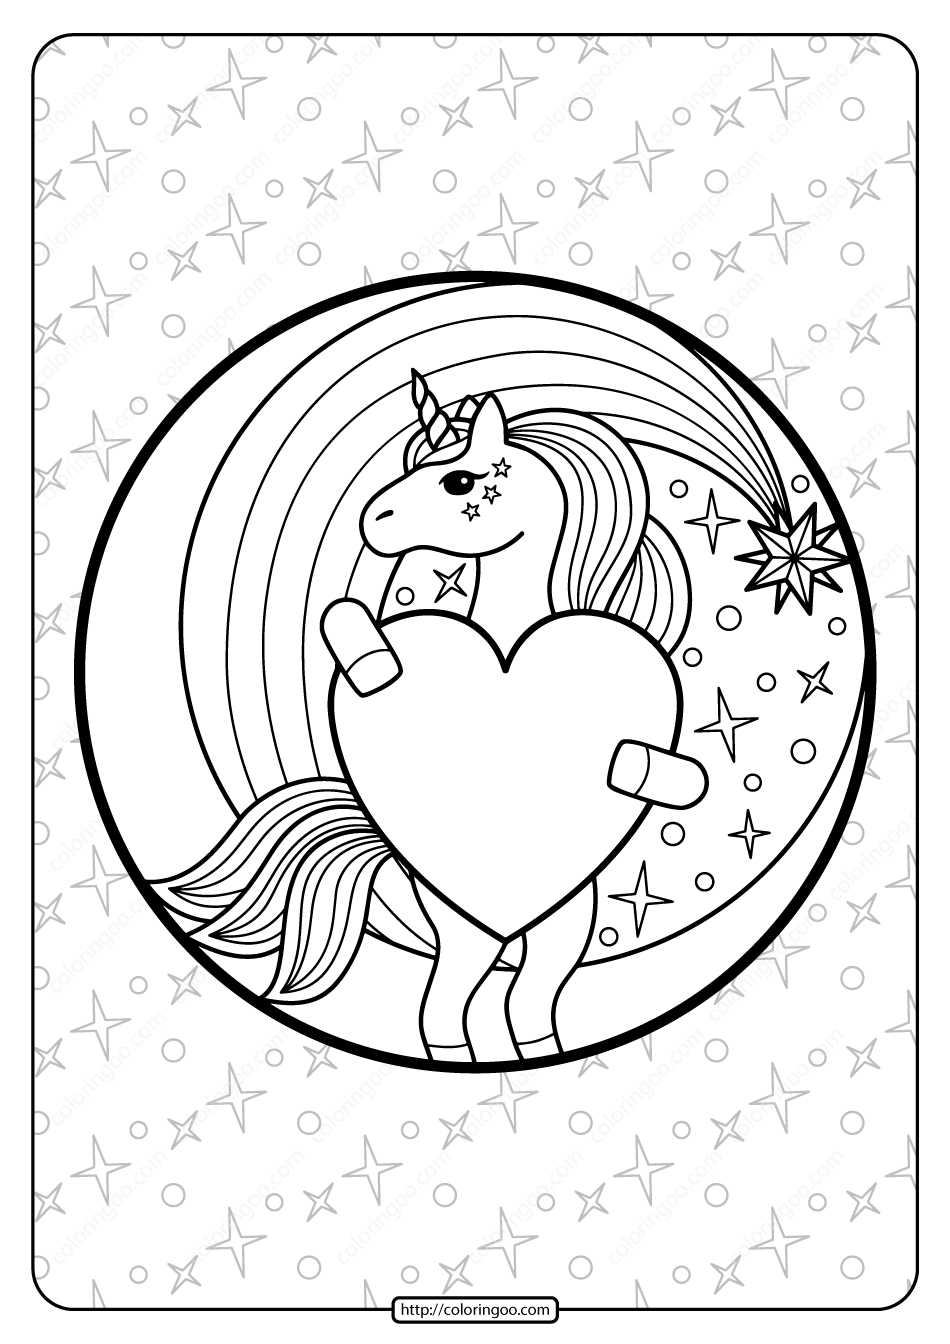 free printable unicorn holding a heart coloring page